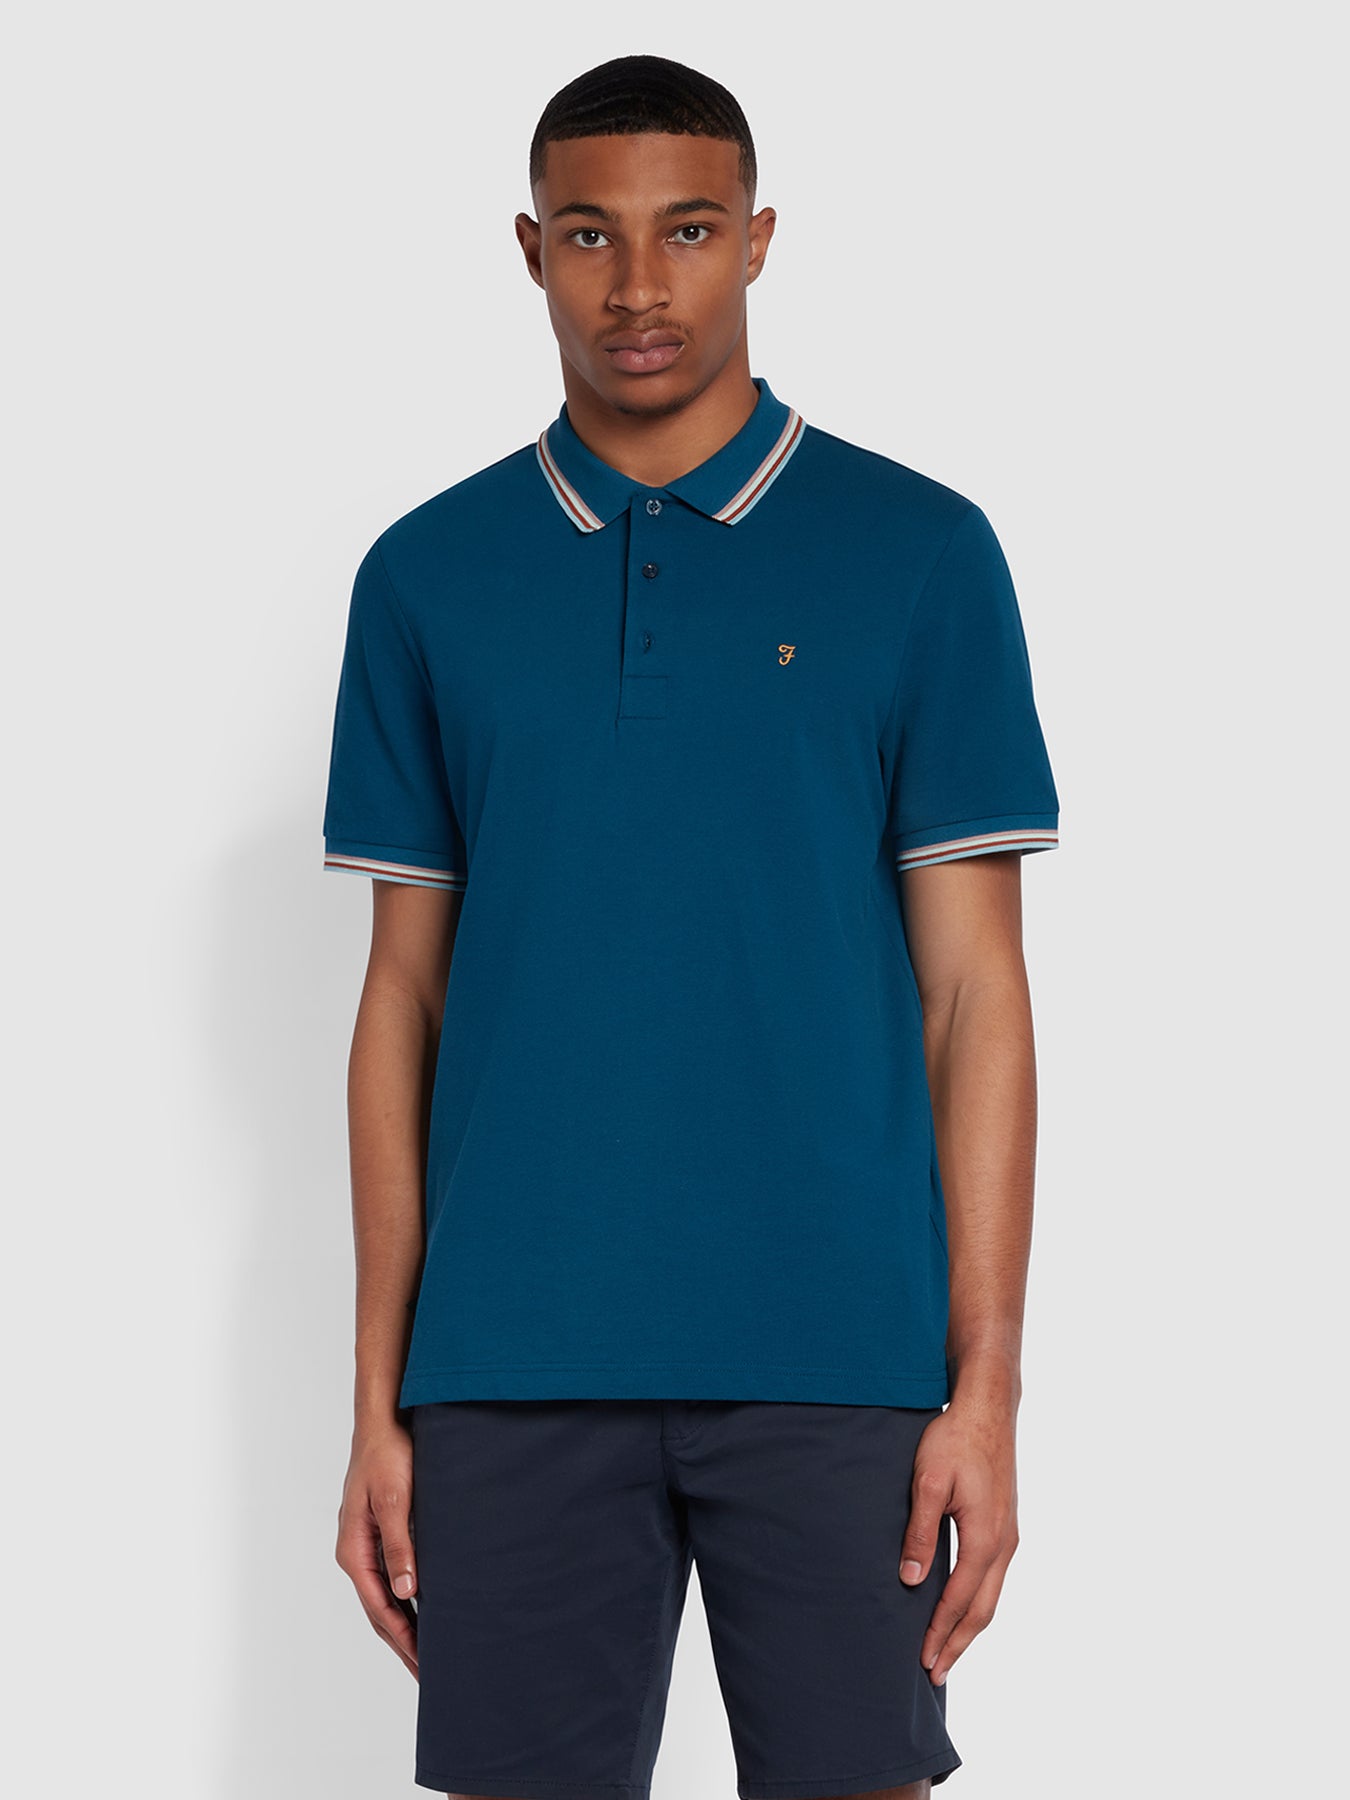 View Alvin Regular Fit Tipped Collar Polo Shirt In Sailor Blue information